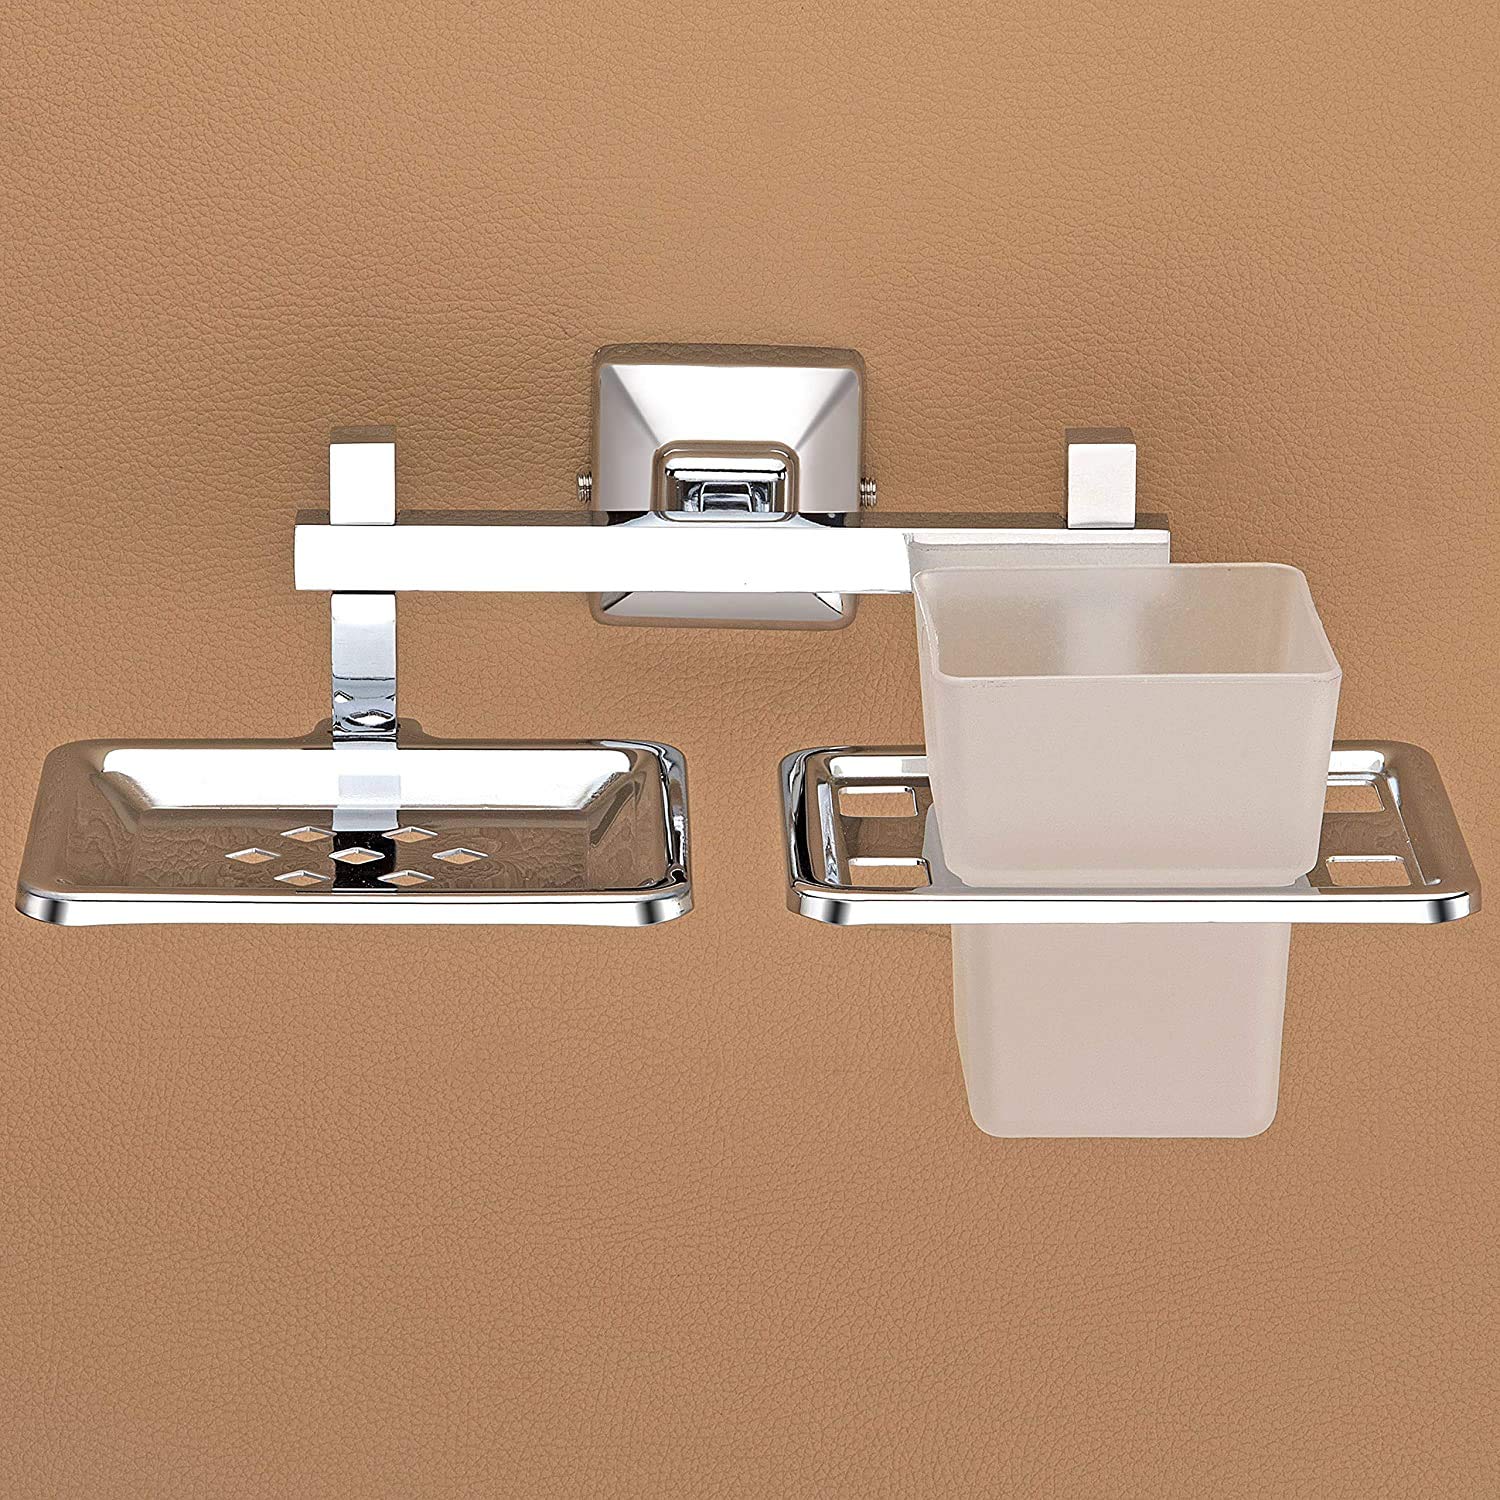 Plantex Stainless Steel 304 Grade Squaro 2in1 Soap Holder with Tumbler Holder/Bathroom Accessories(Chrome) - Pack of 3